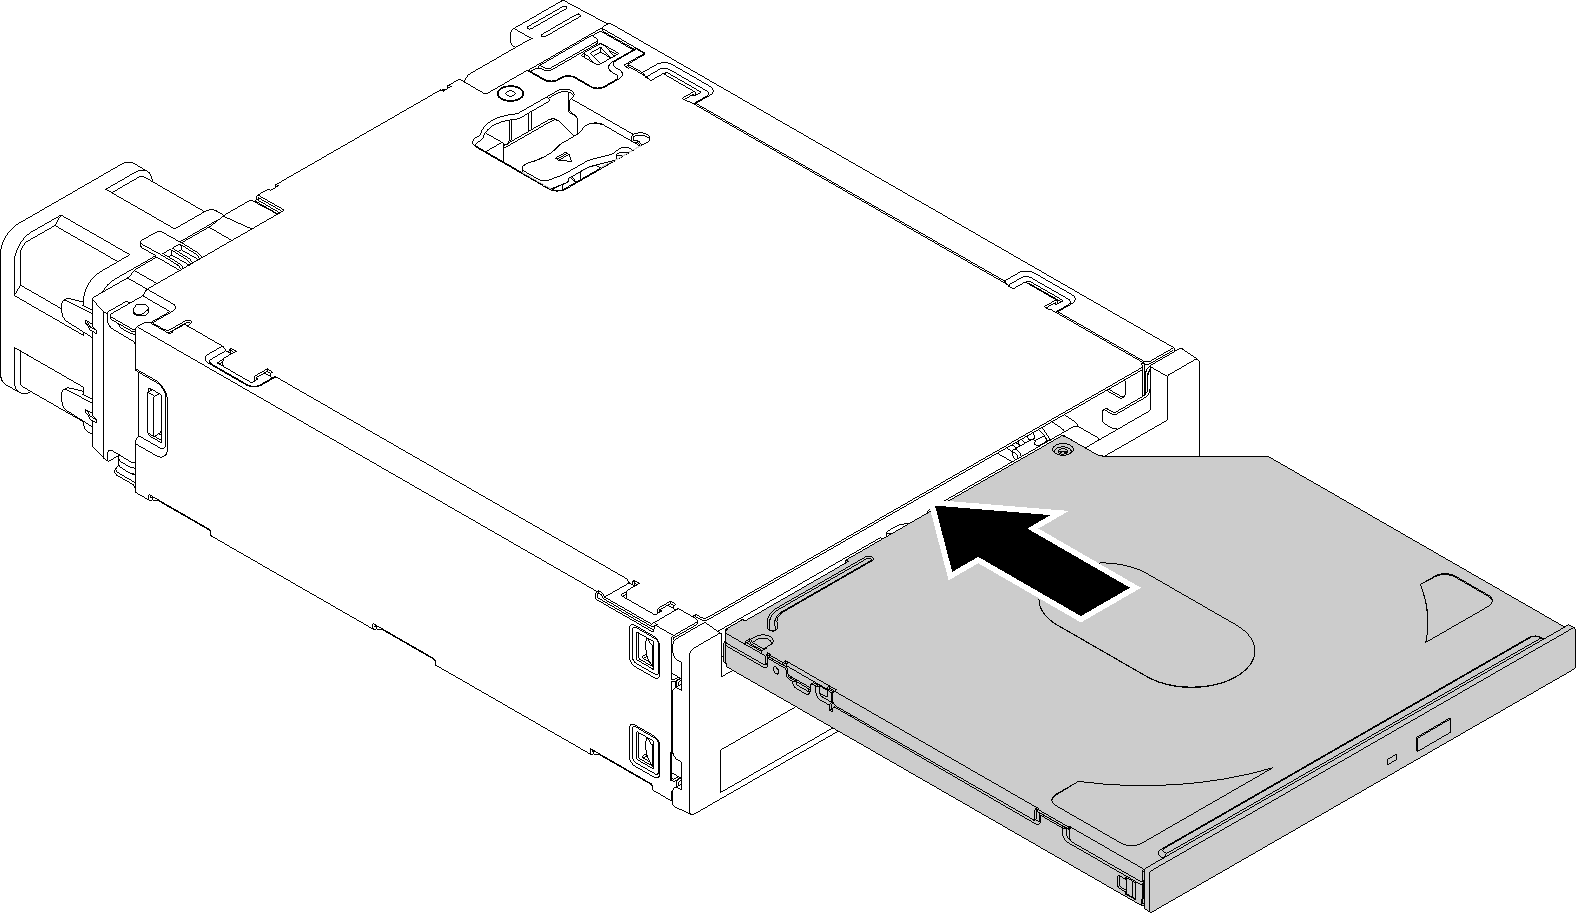 Installing the slim optical drive into the drive bay adapter